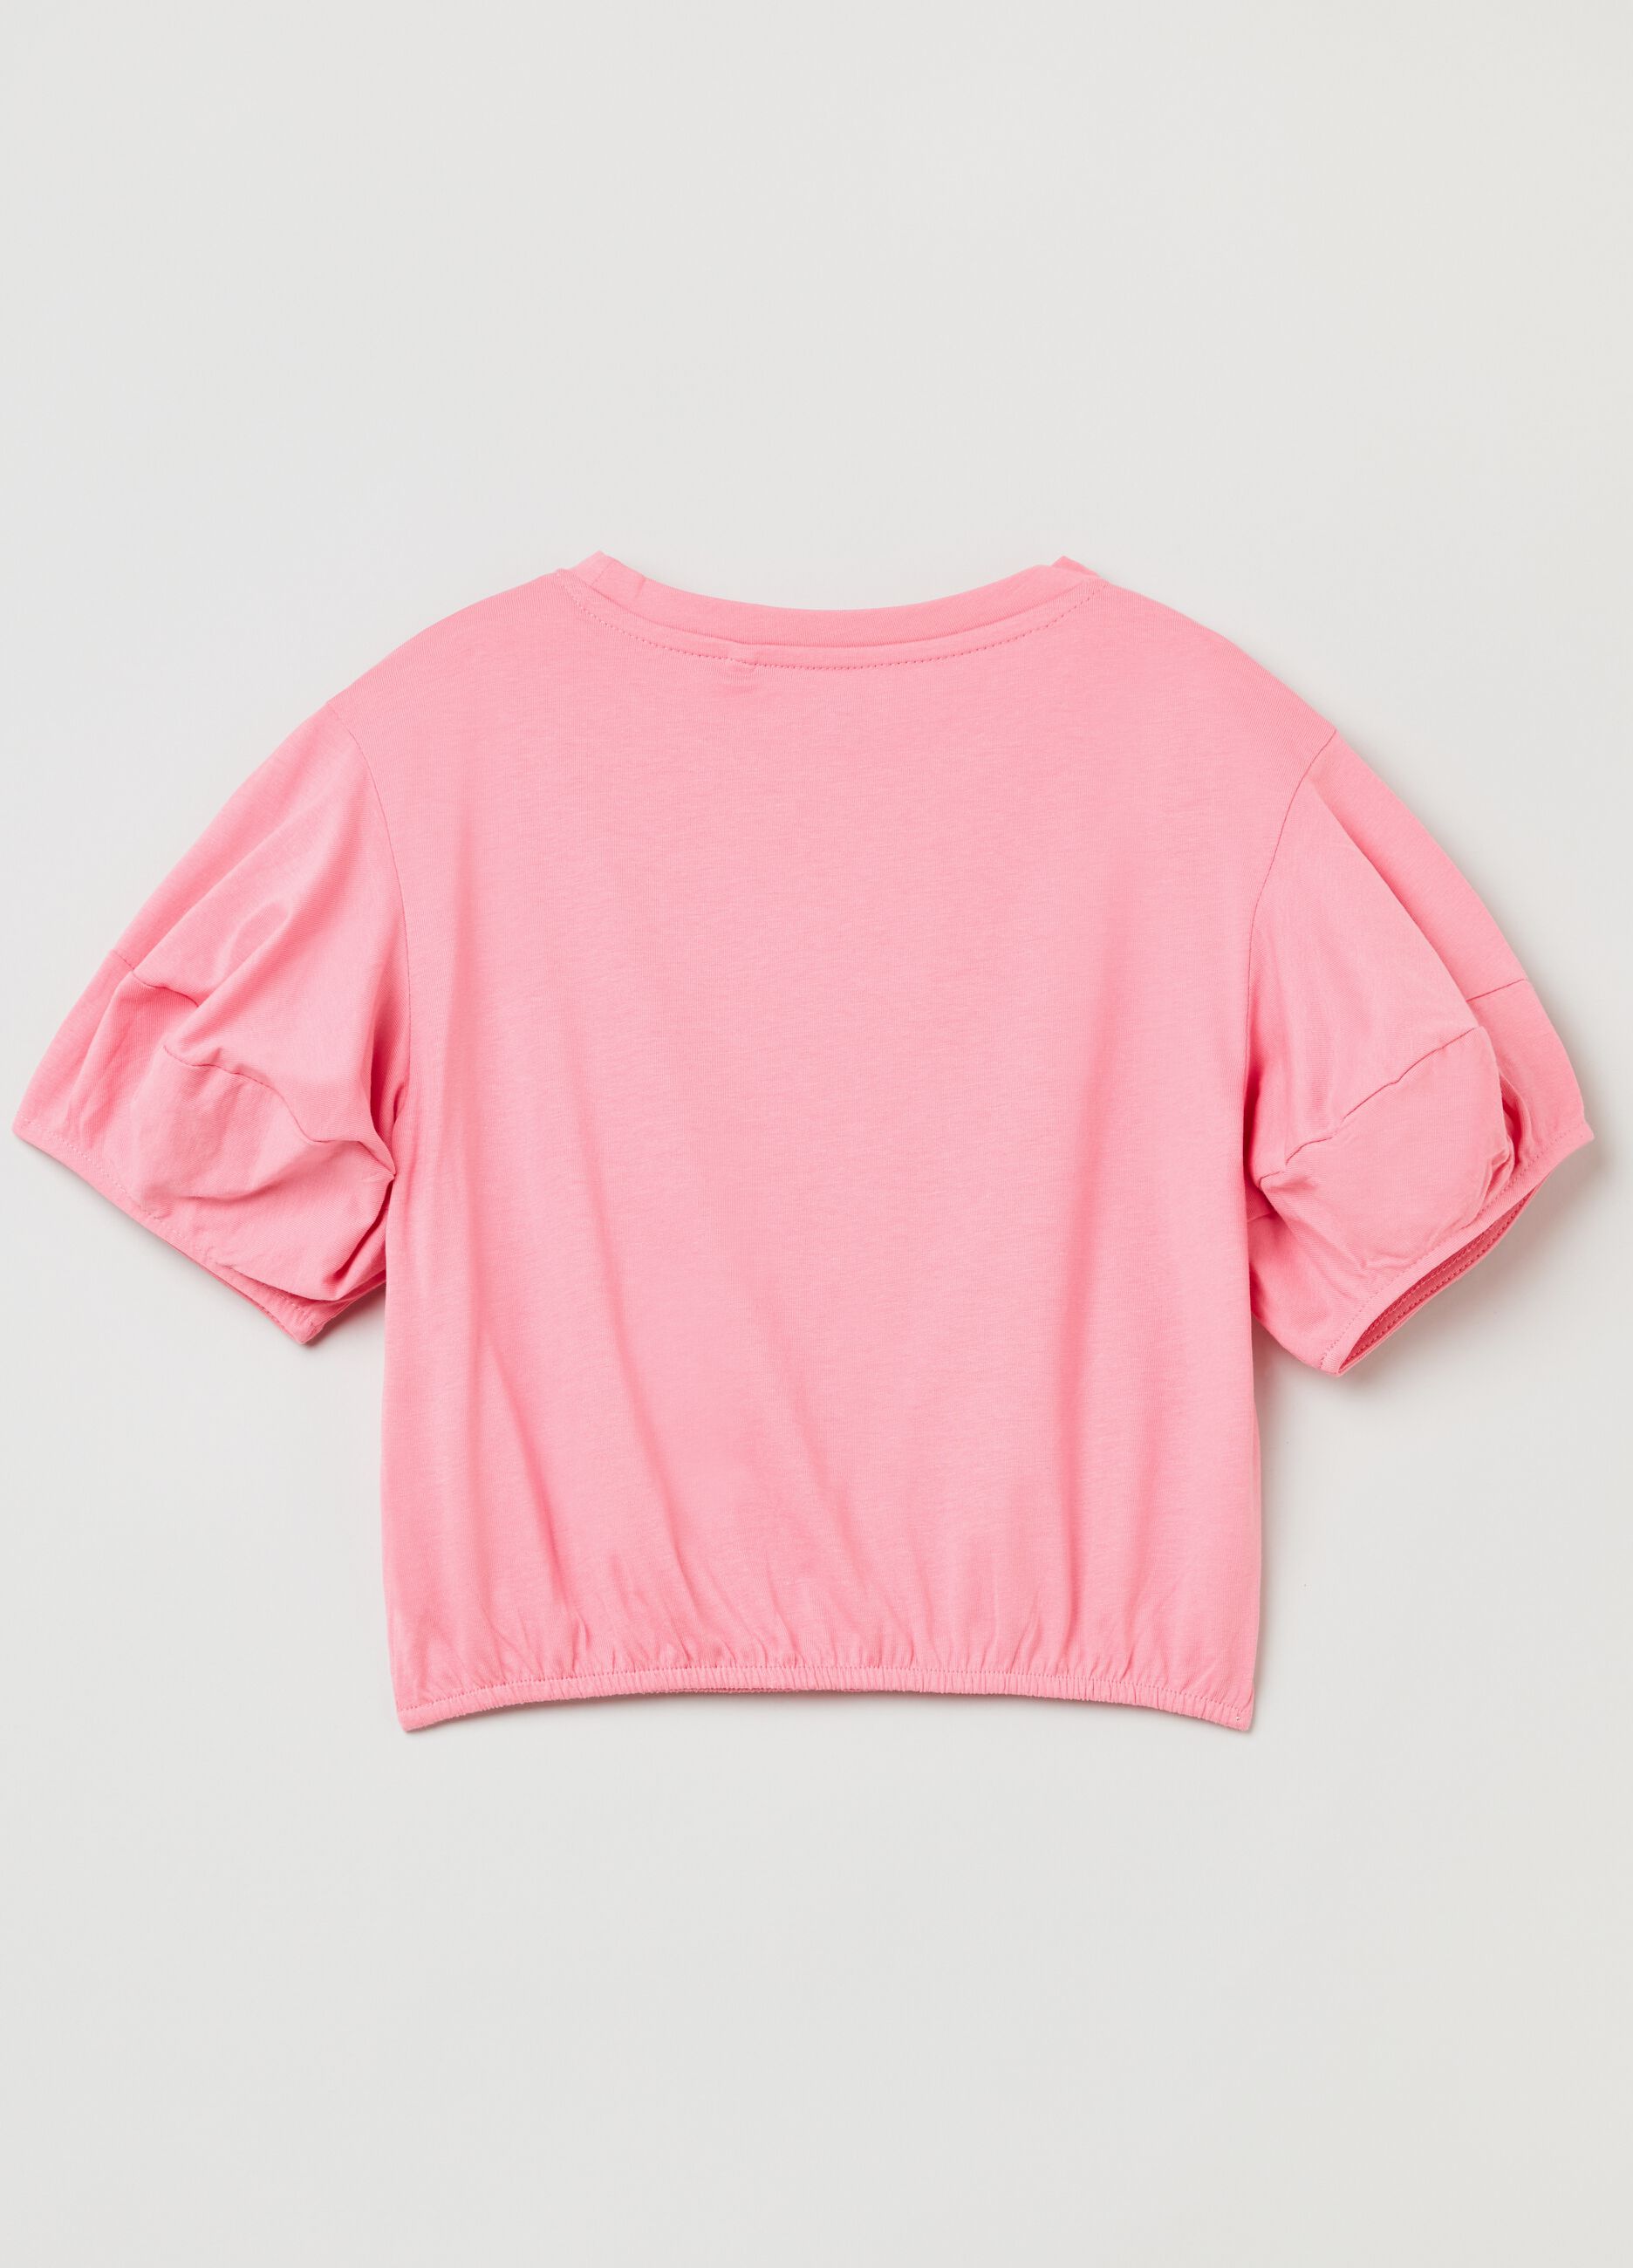 Cotton T-shirt with puff sleeves